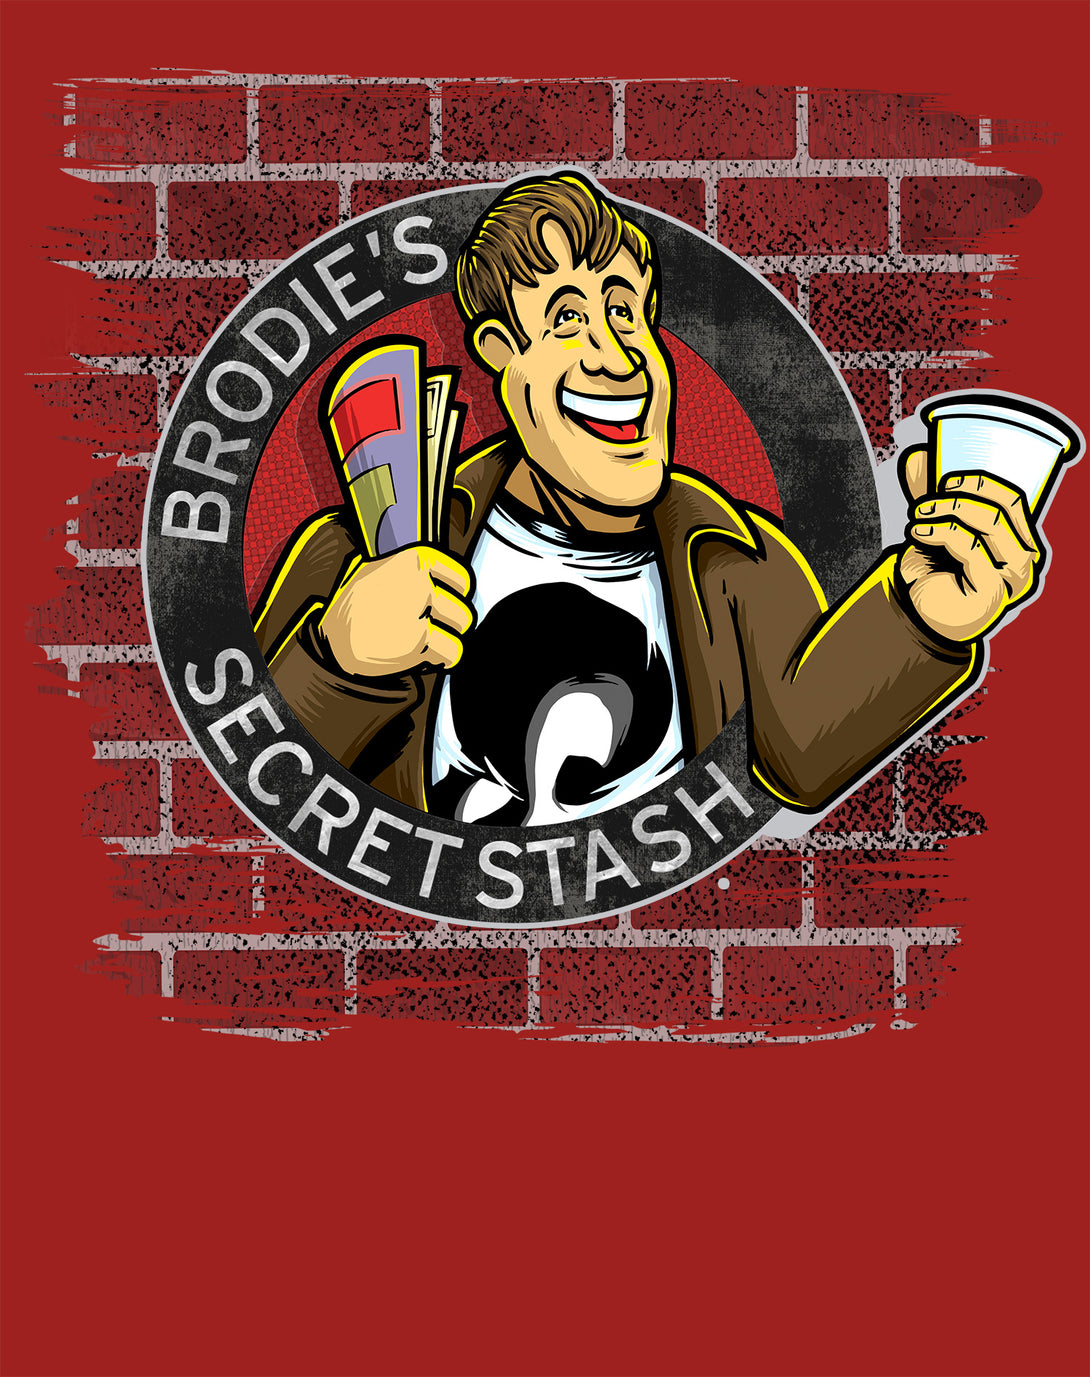 Kevin Smith Jay & Silent Bob Reboot Brodie's Secret Stash Store Logo Wall Official Men's T-Shirt Red - Urban Species Design Close Up